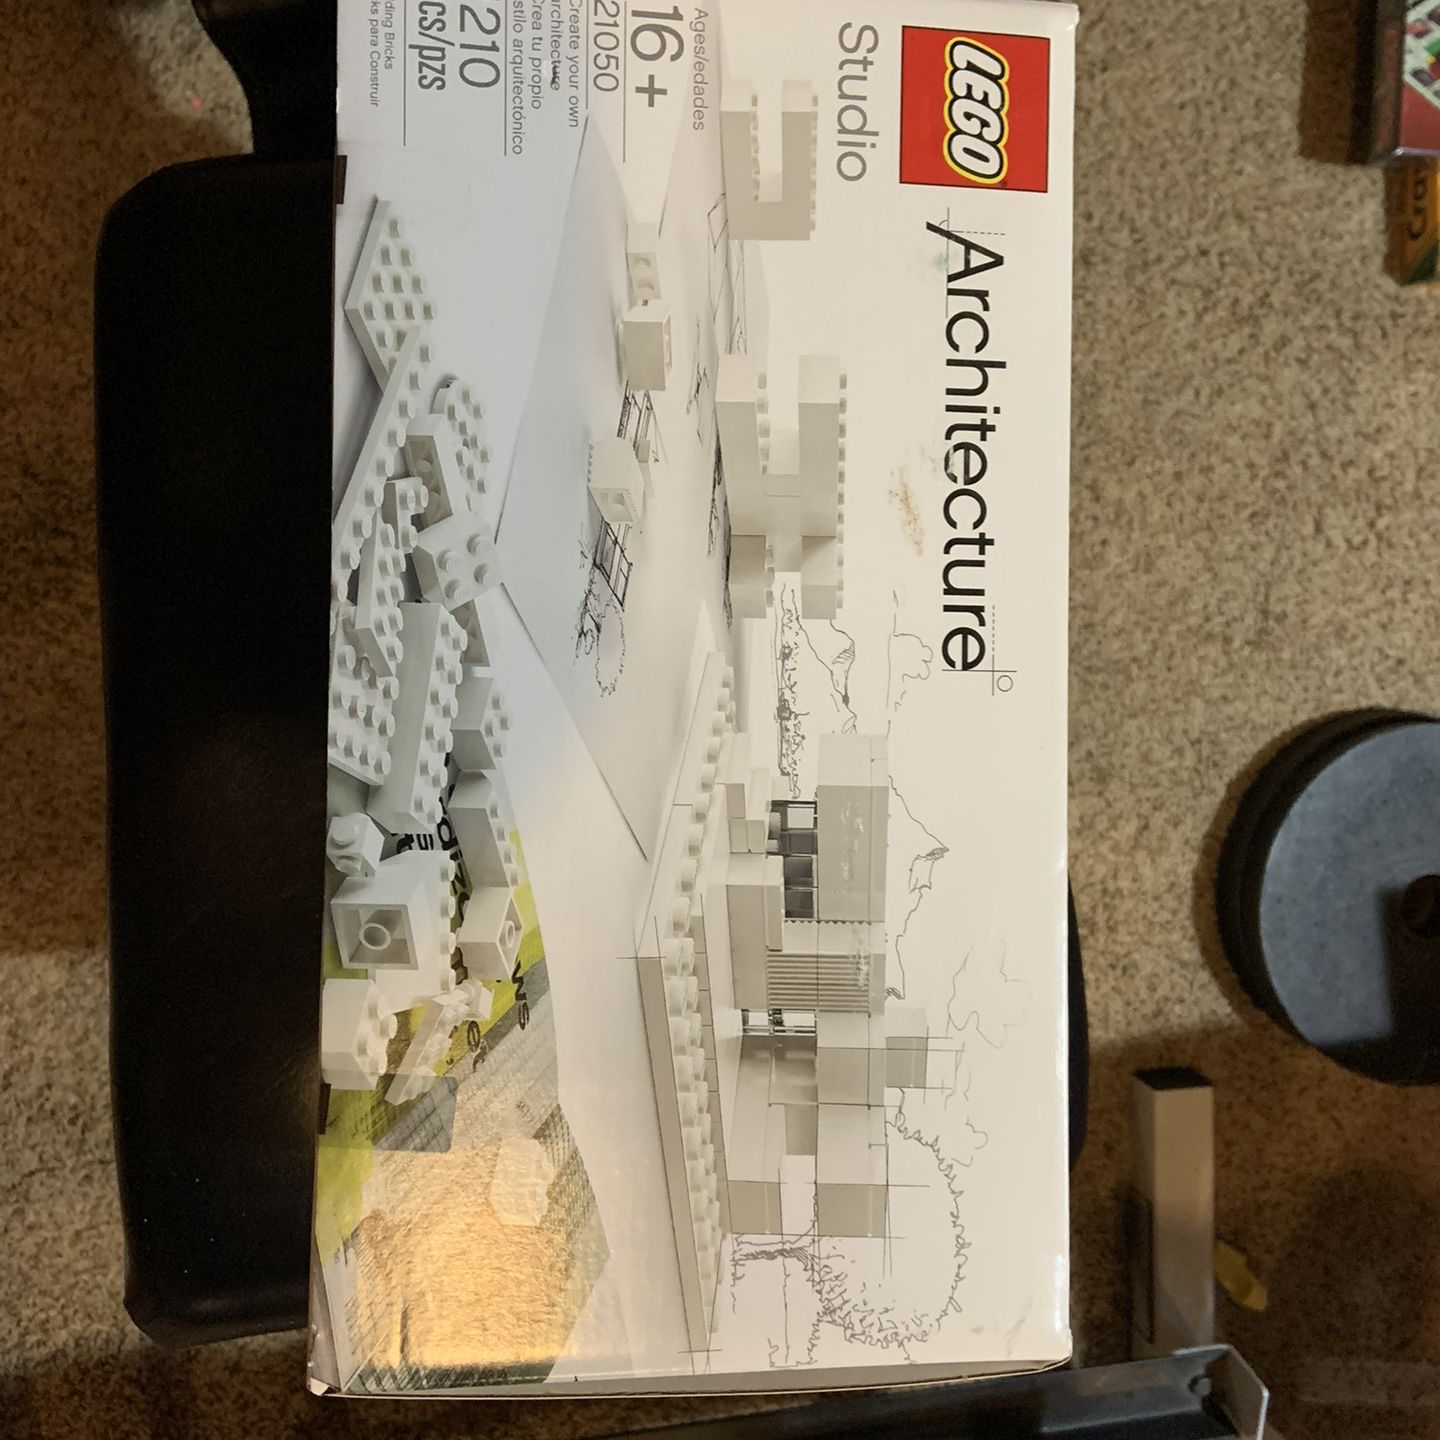 mor Whirlpool Thriller Lego Architecture Studio Set, 21050 (Retired Set) for Sale in Plainfield,  IL - OfferUp